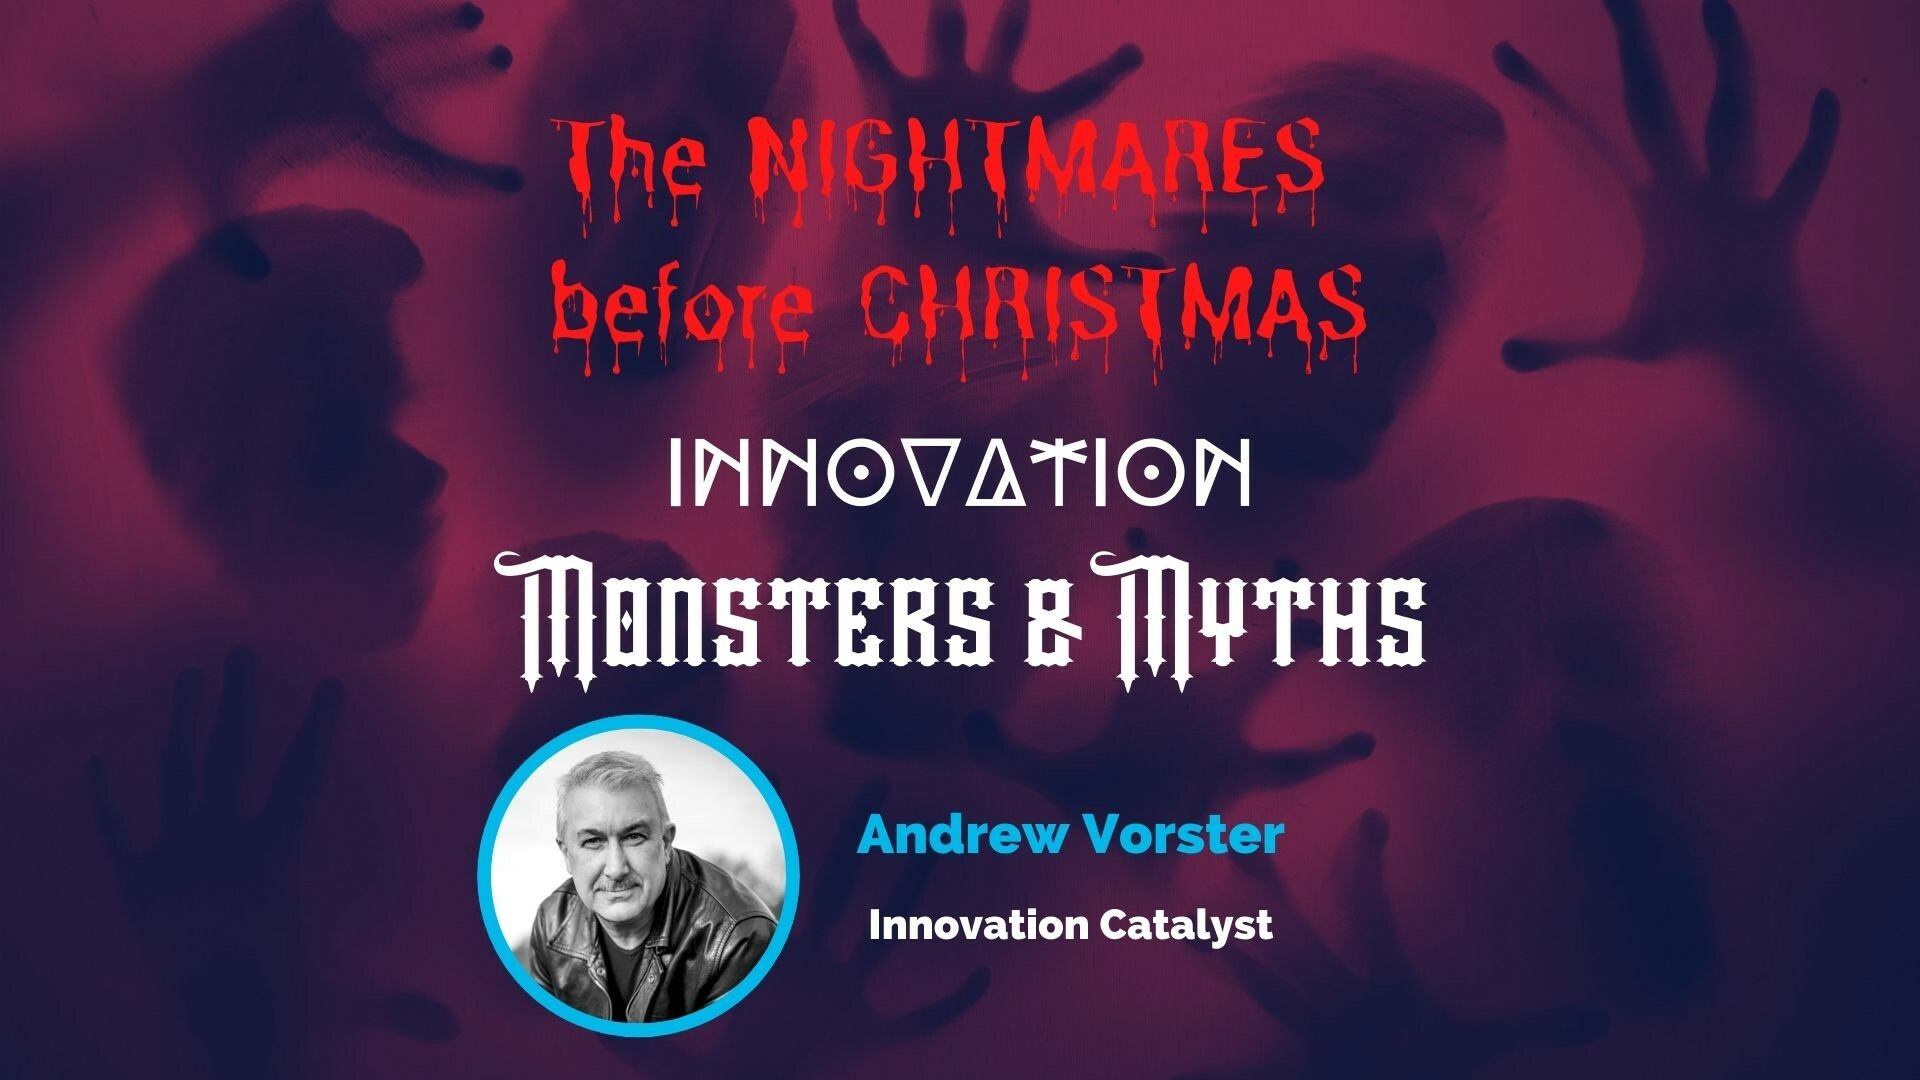 Nightmares before christmas overview 2